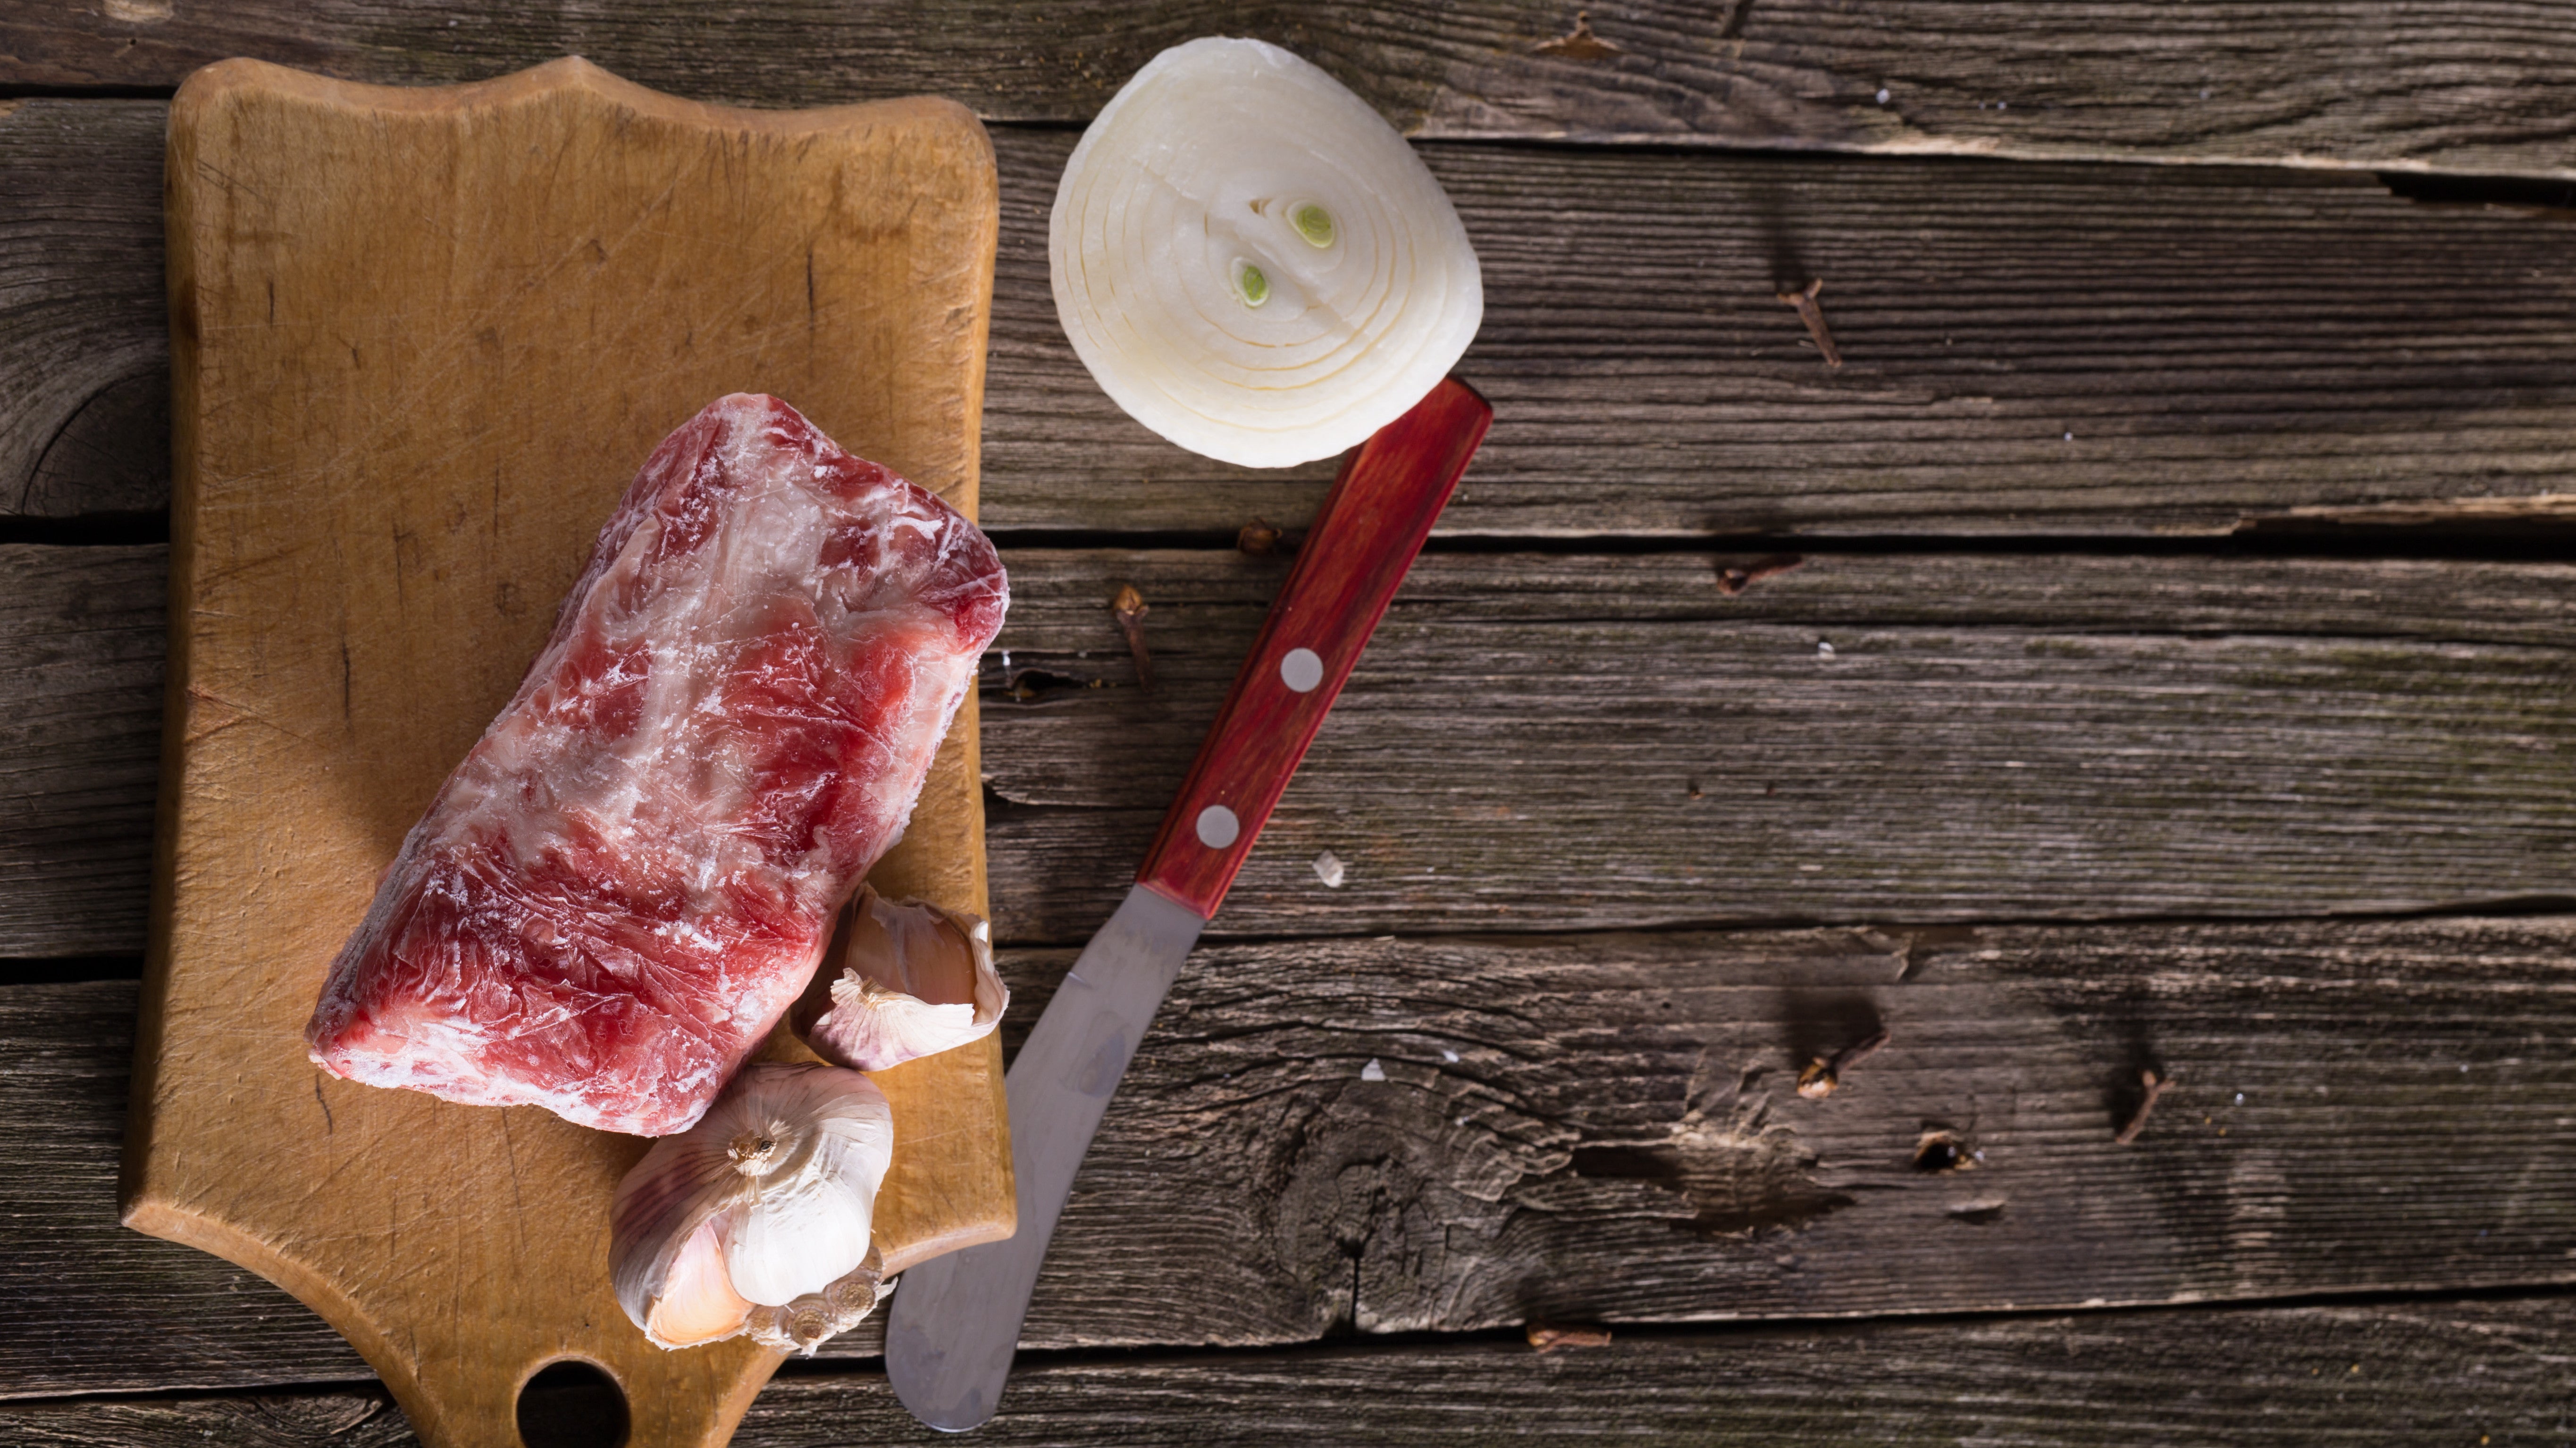 How To Defrost Frozen Meat In Half The Time